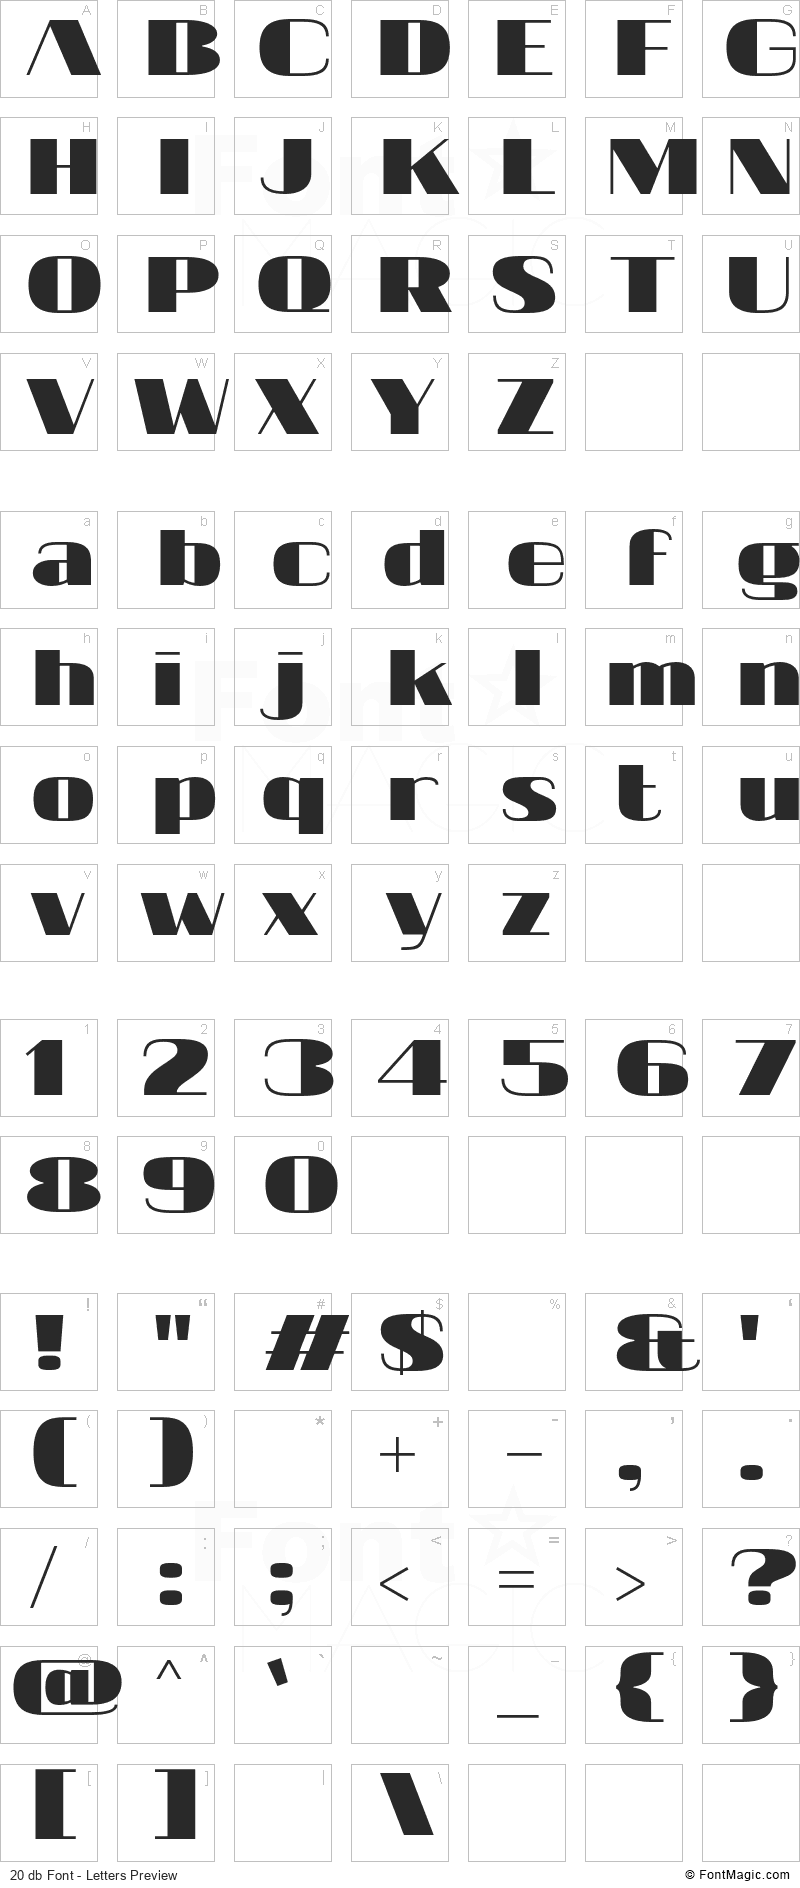 20 db Font - All Latters Preview Chart